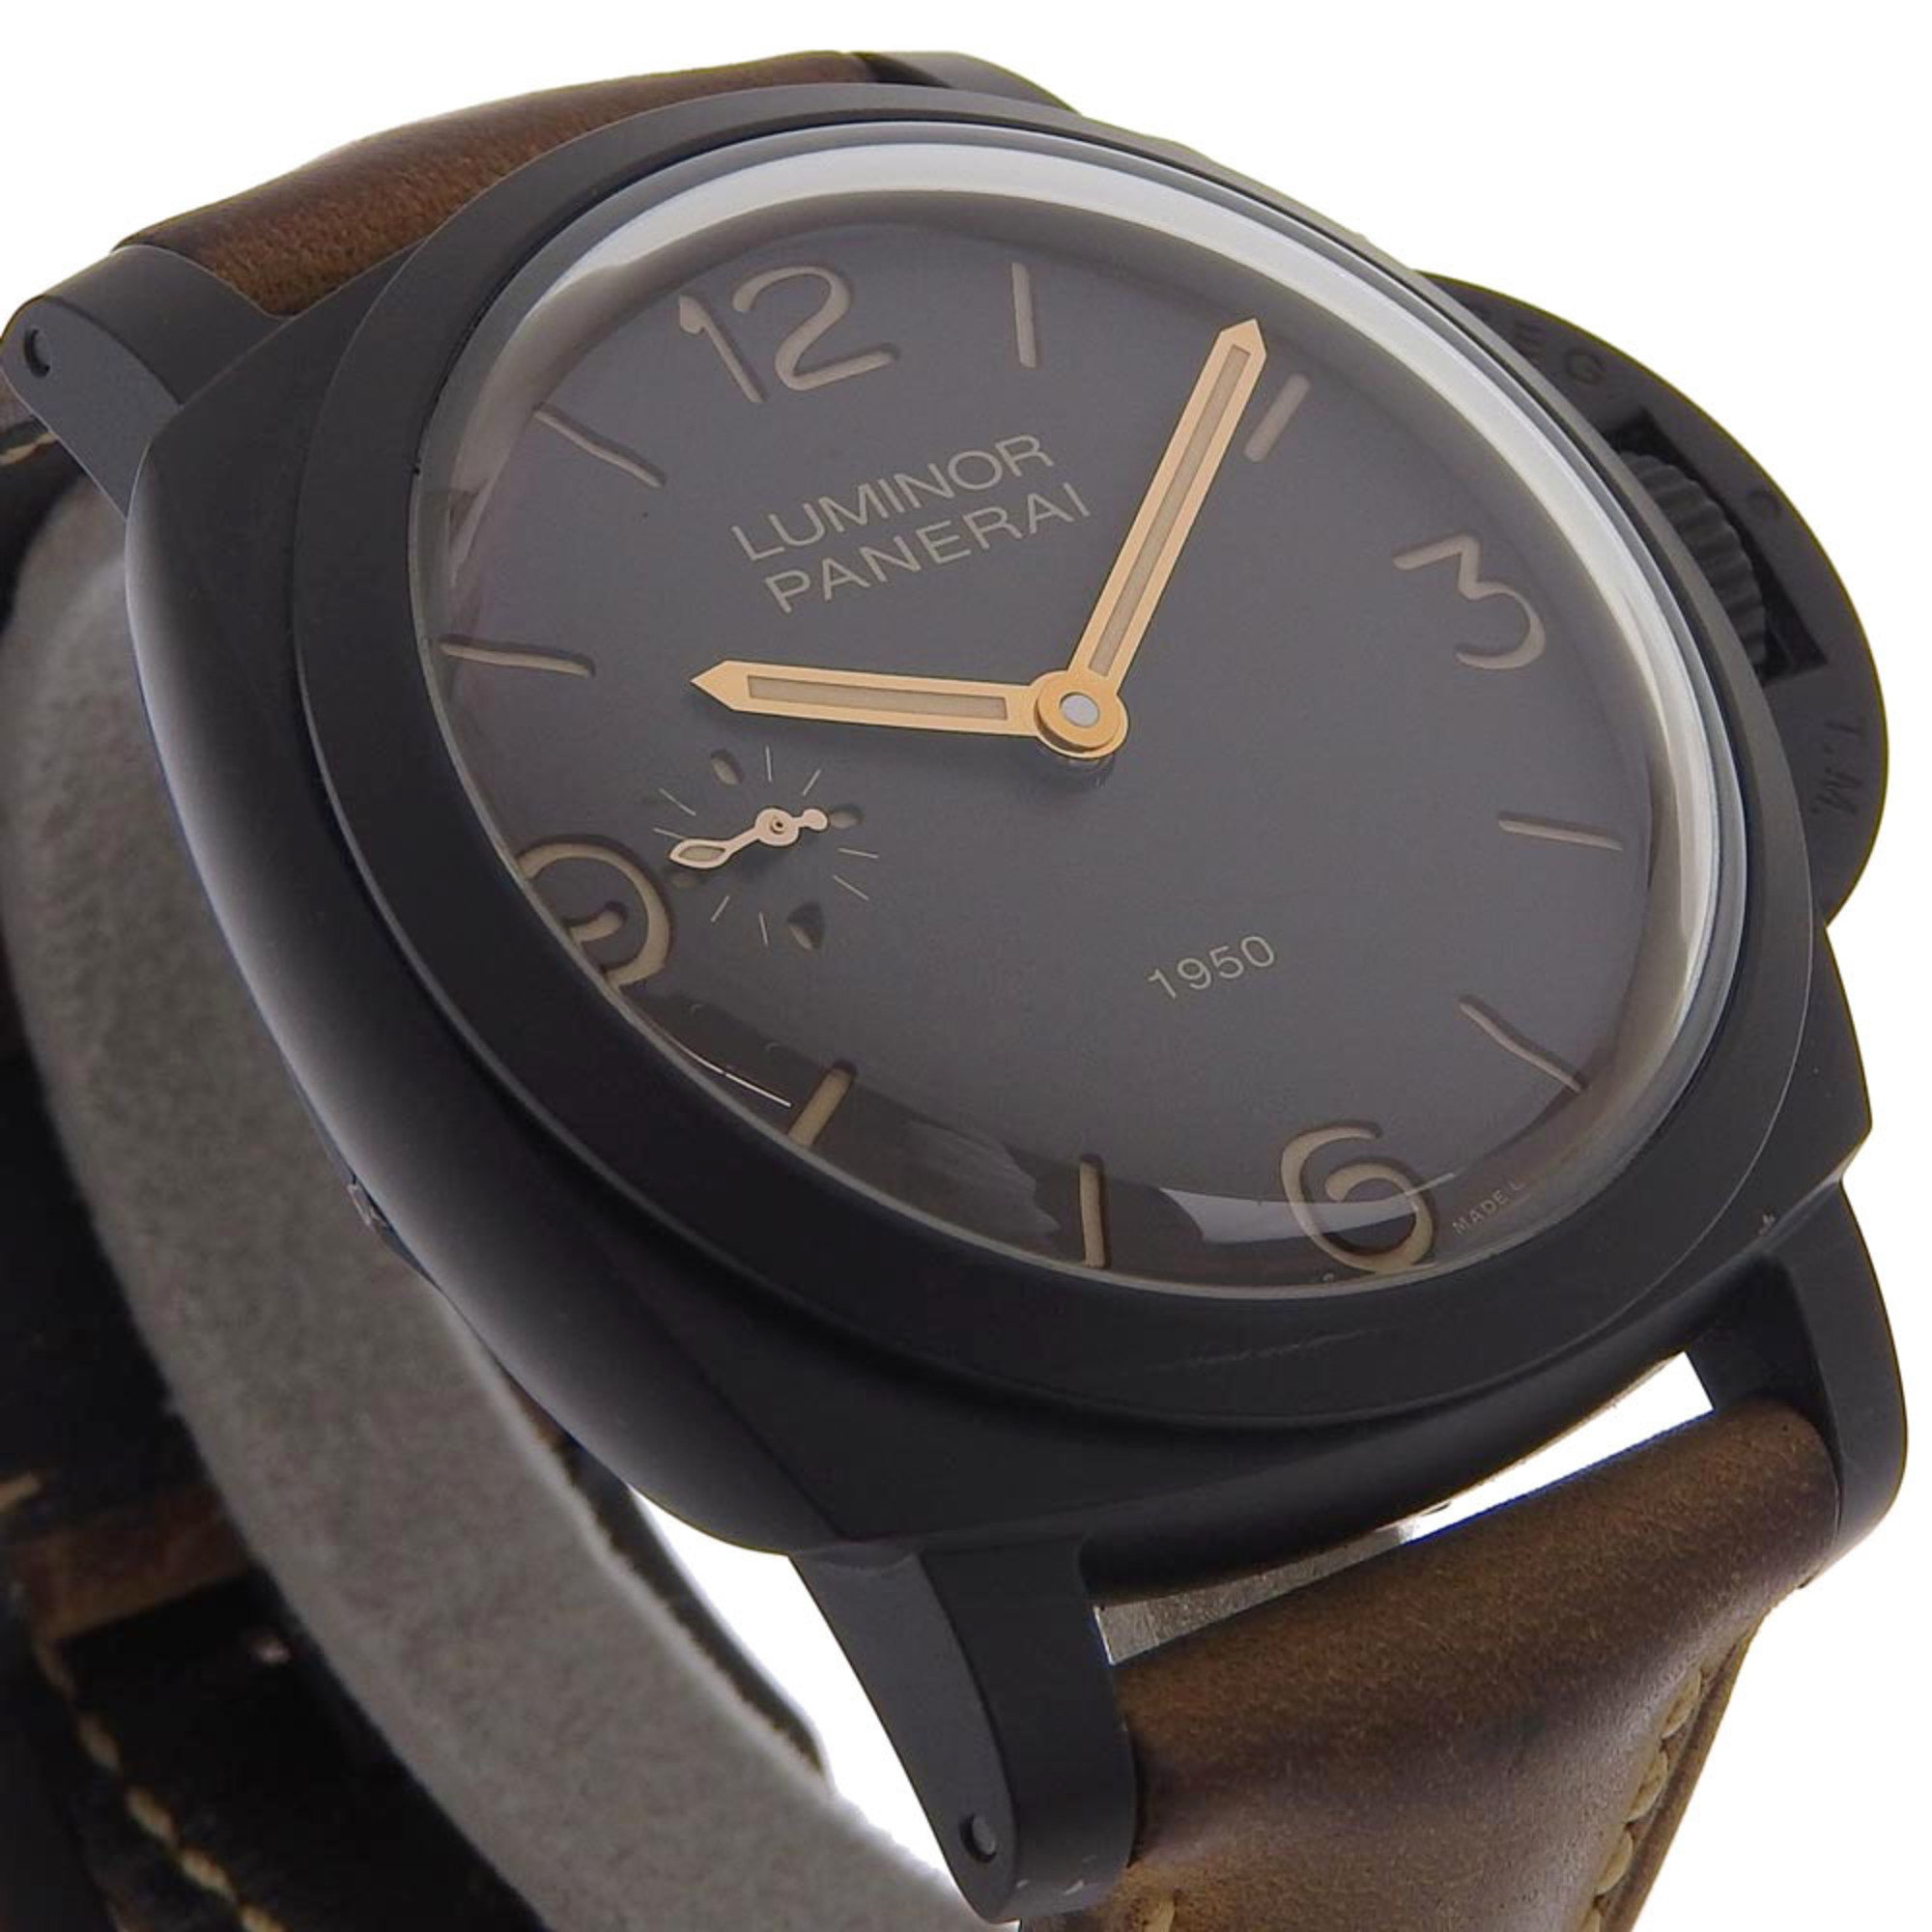 Panerai Watch Luminor 1950 3DAYS Limited 2000 PAM00375 Composite x Leather Brown Manual Winding Small Seconds Dial Men's